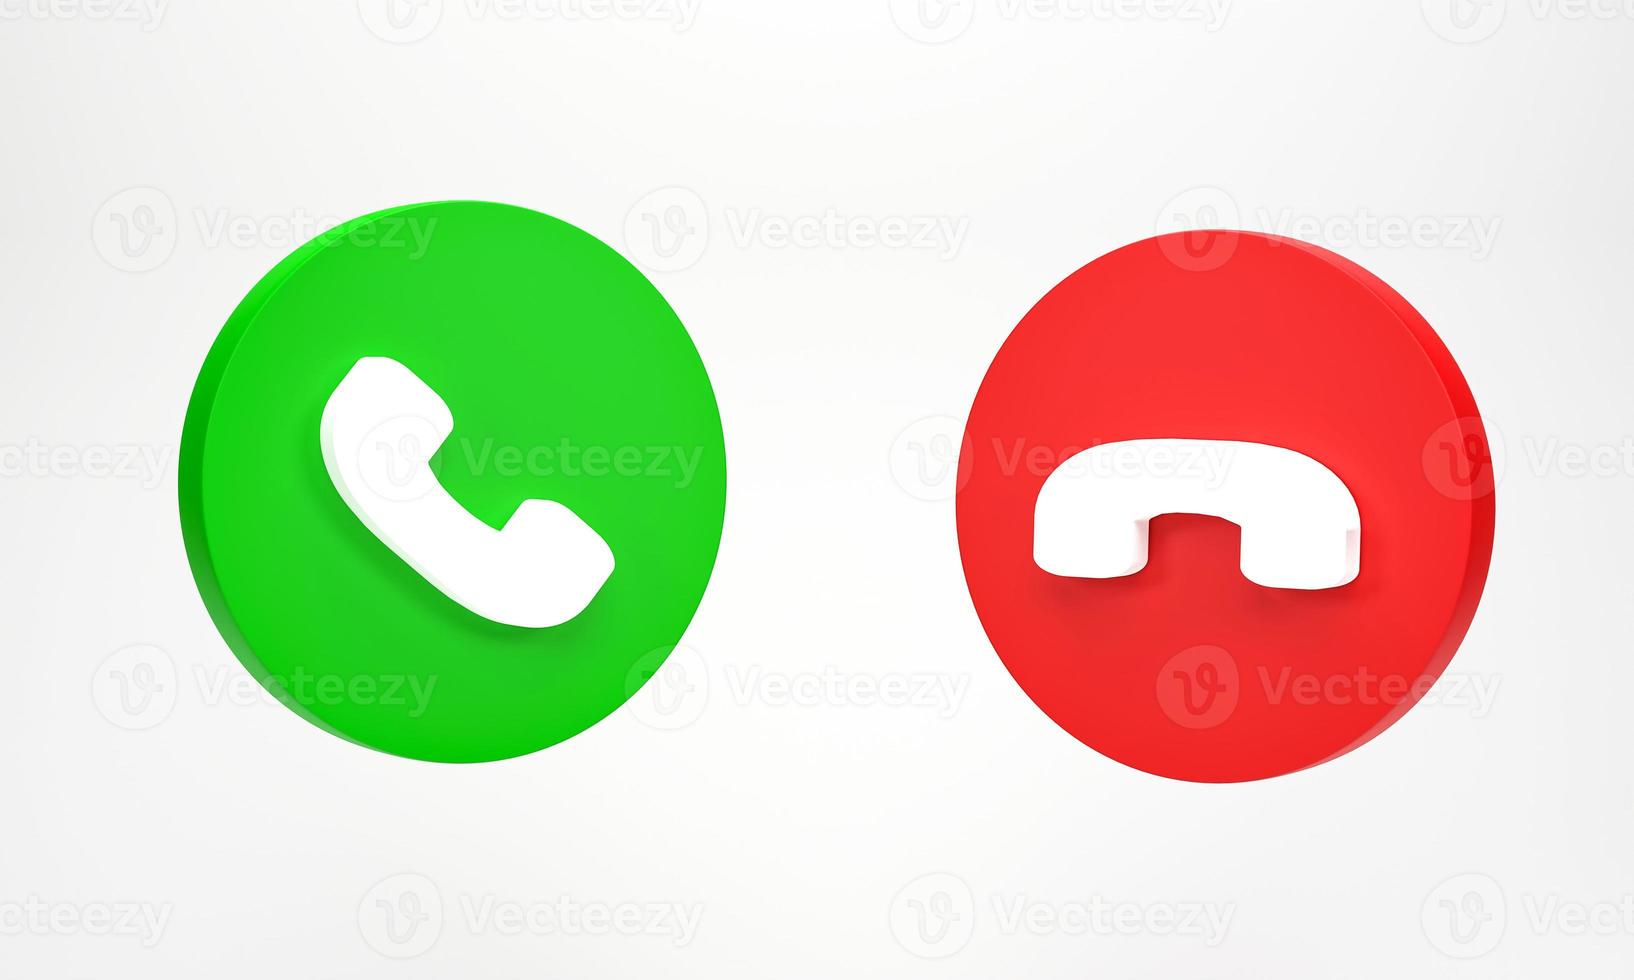 3D rendering, 3D illustration. Phone call icon isolated on white background. Telephone icons in green accept and red reject incoming call photo